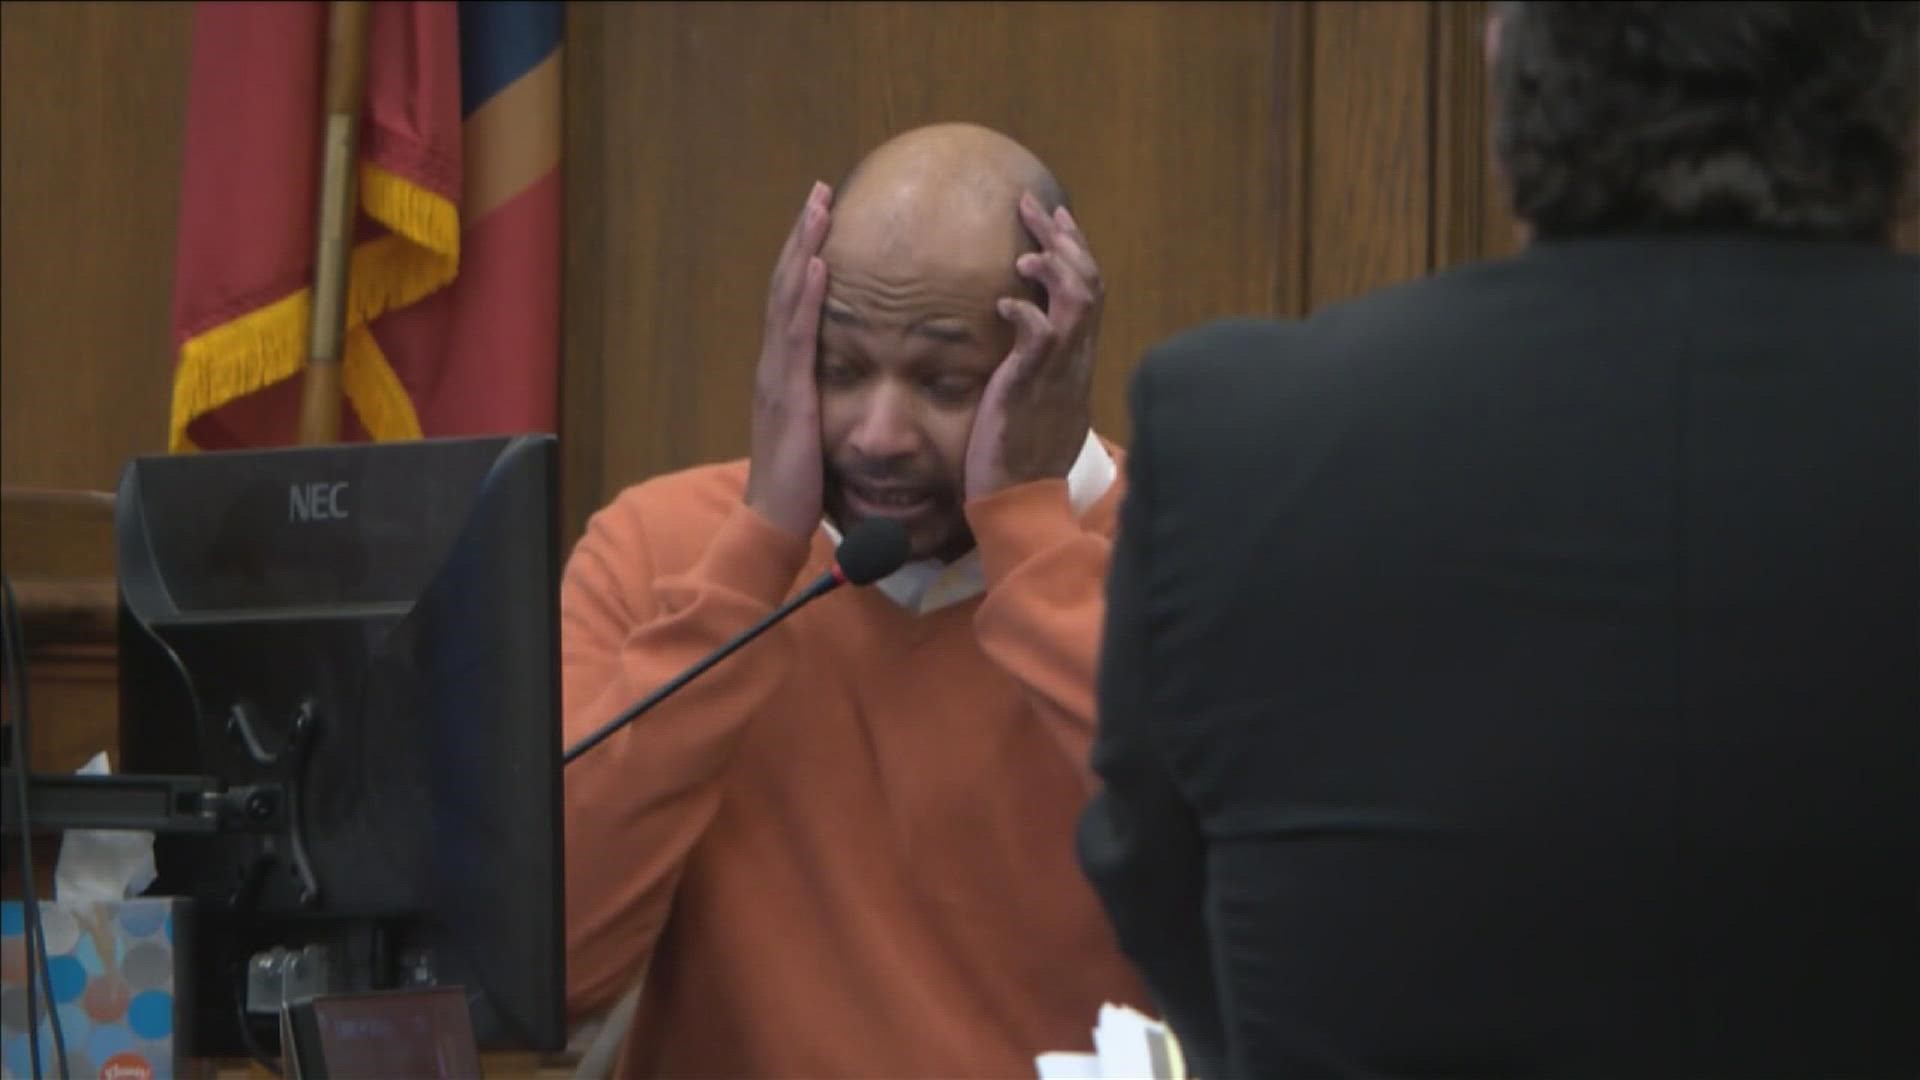 Martez Abram was convicted on two counts of capital murder and one count of attempted murder after killing two employees at a Southaven Walmart in 2019.